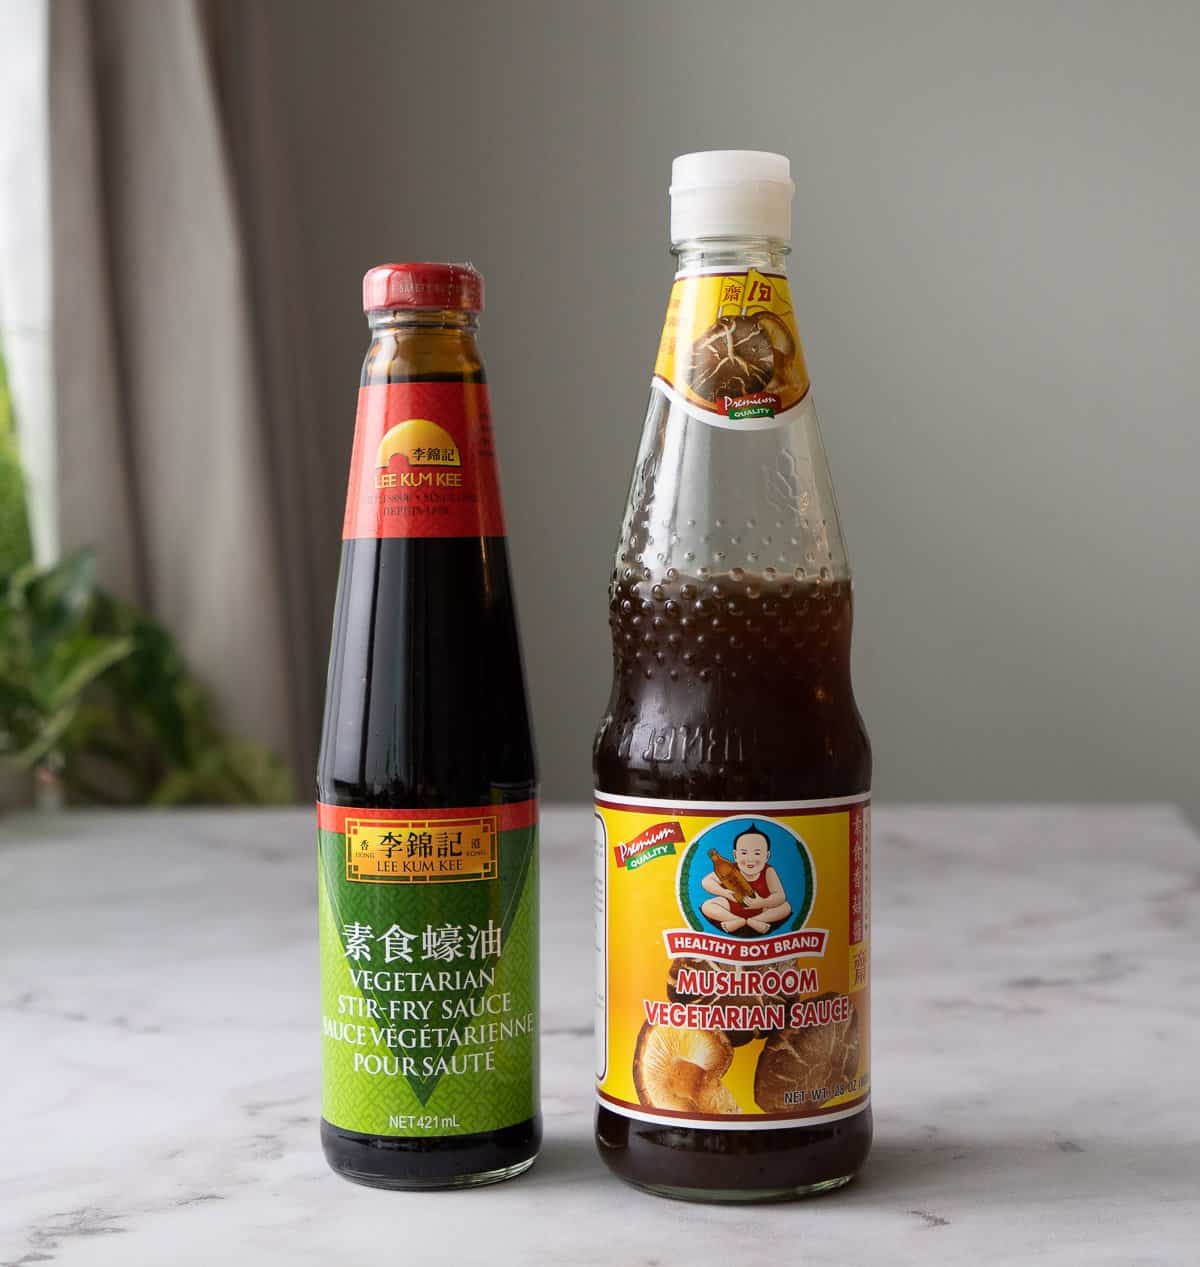 Lee Kum Kee Oyster Sauce (1 can)